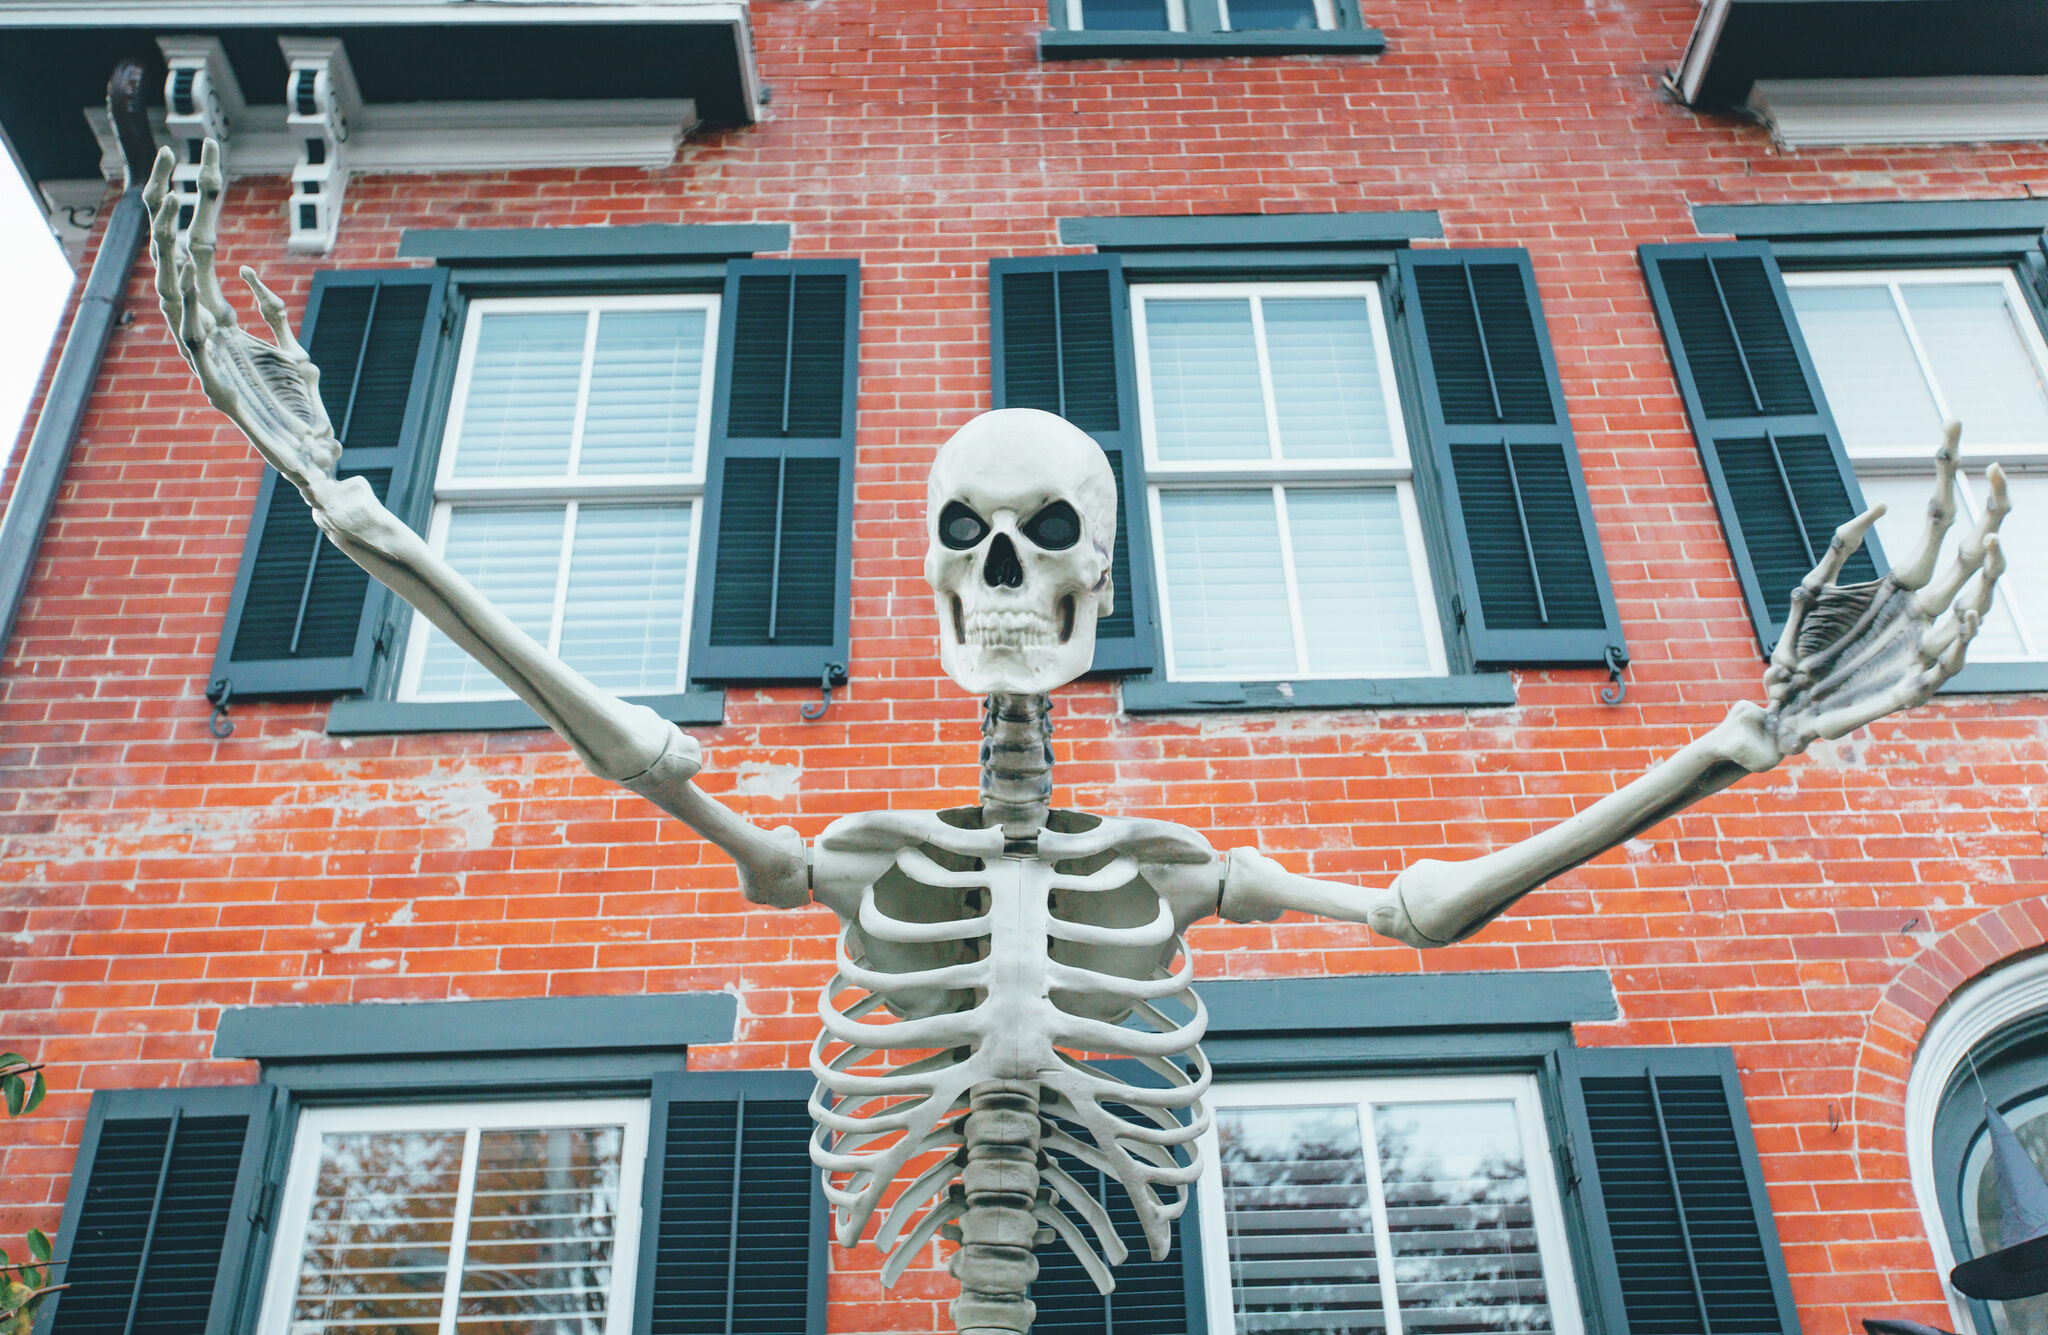 H-E-B is now offering a 10-foot giant skeleton for Halloween